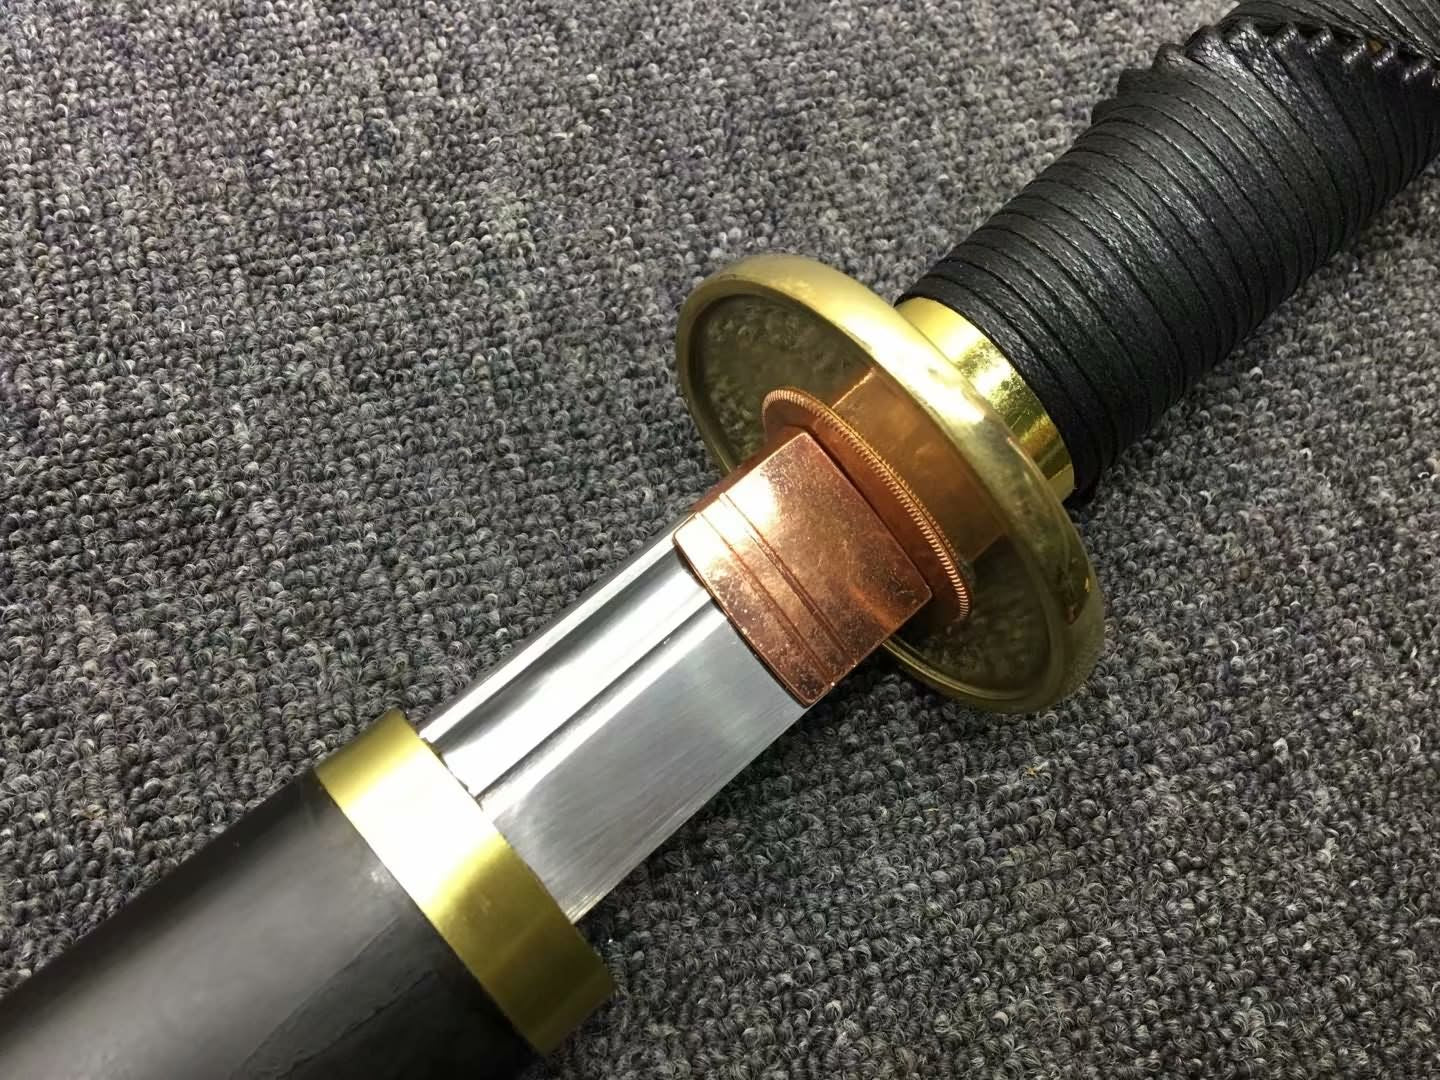 Horse chopping sword,High carbon steel blade,Full tang - Chinese sword shop